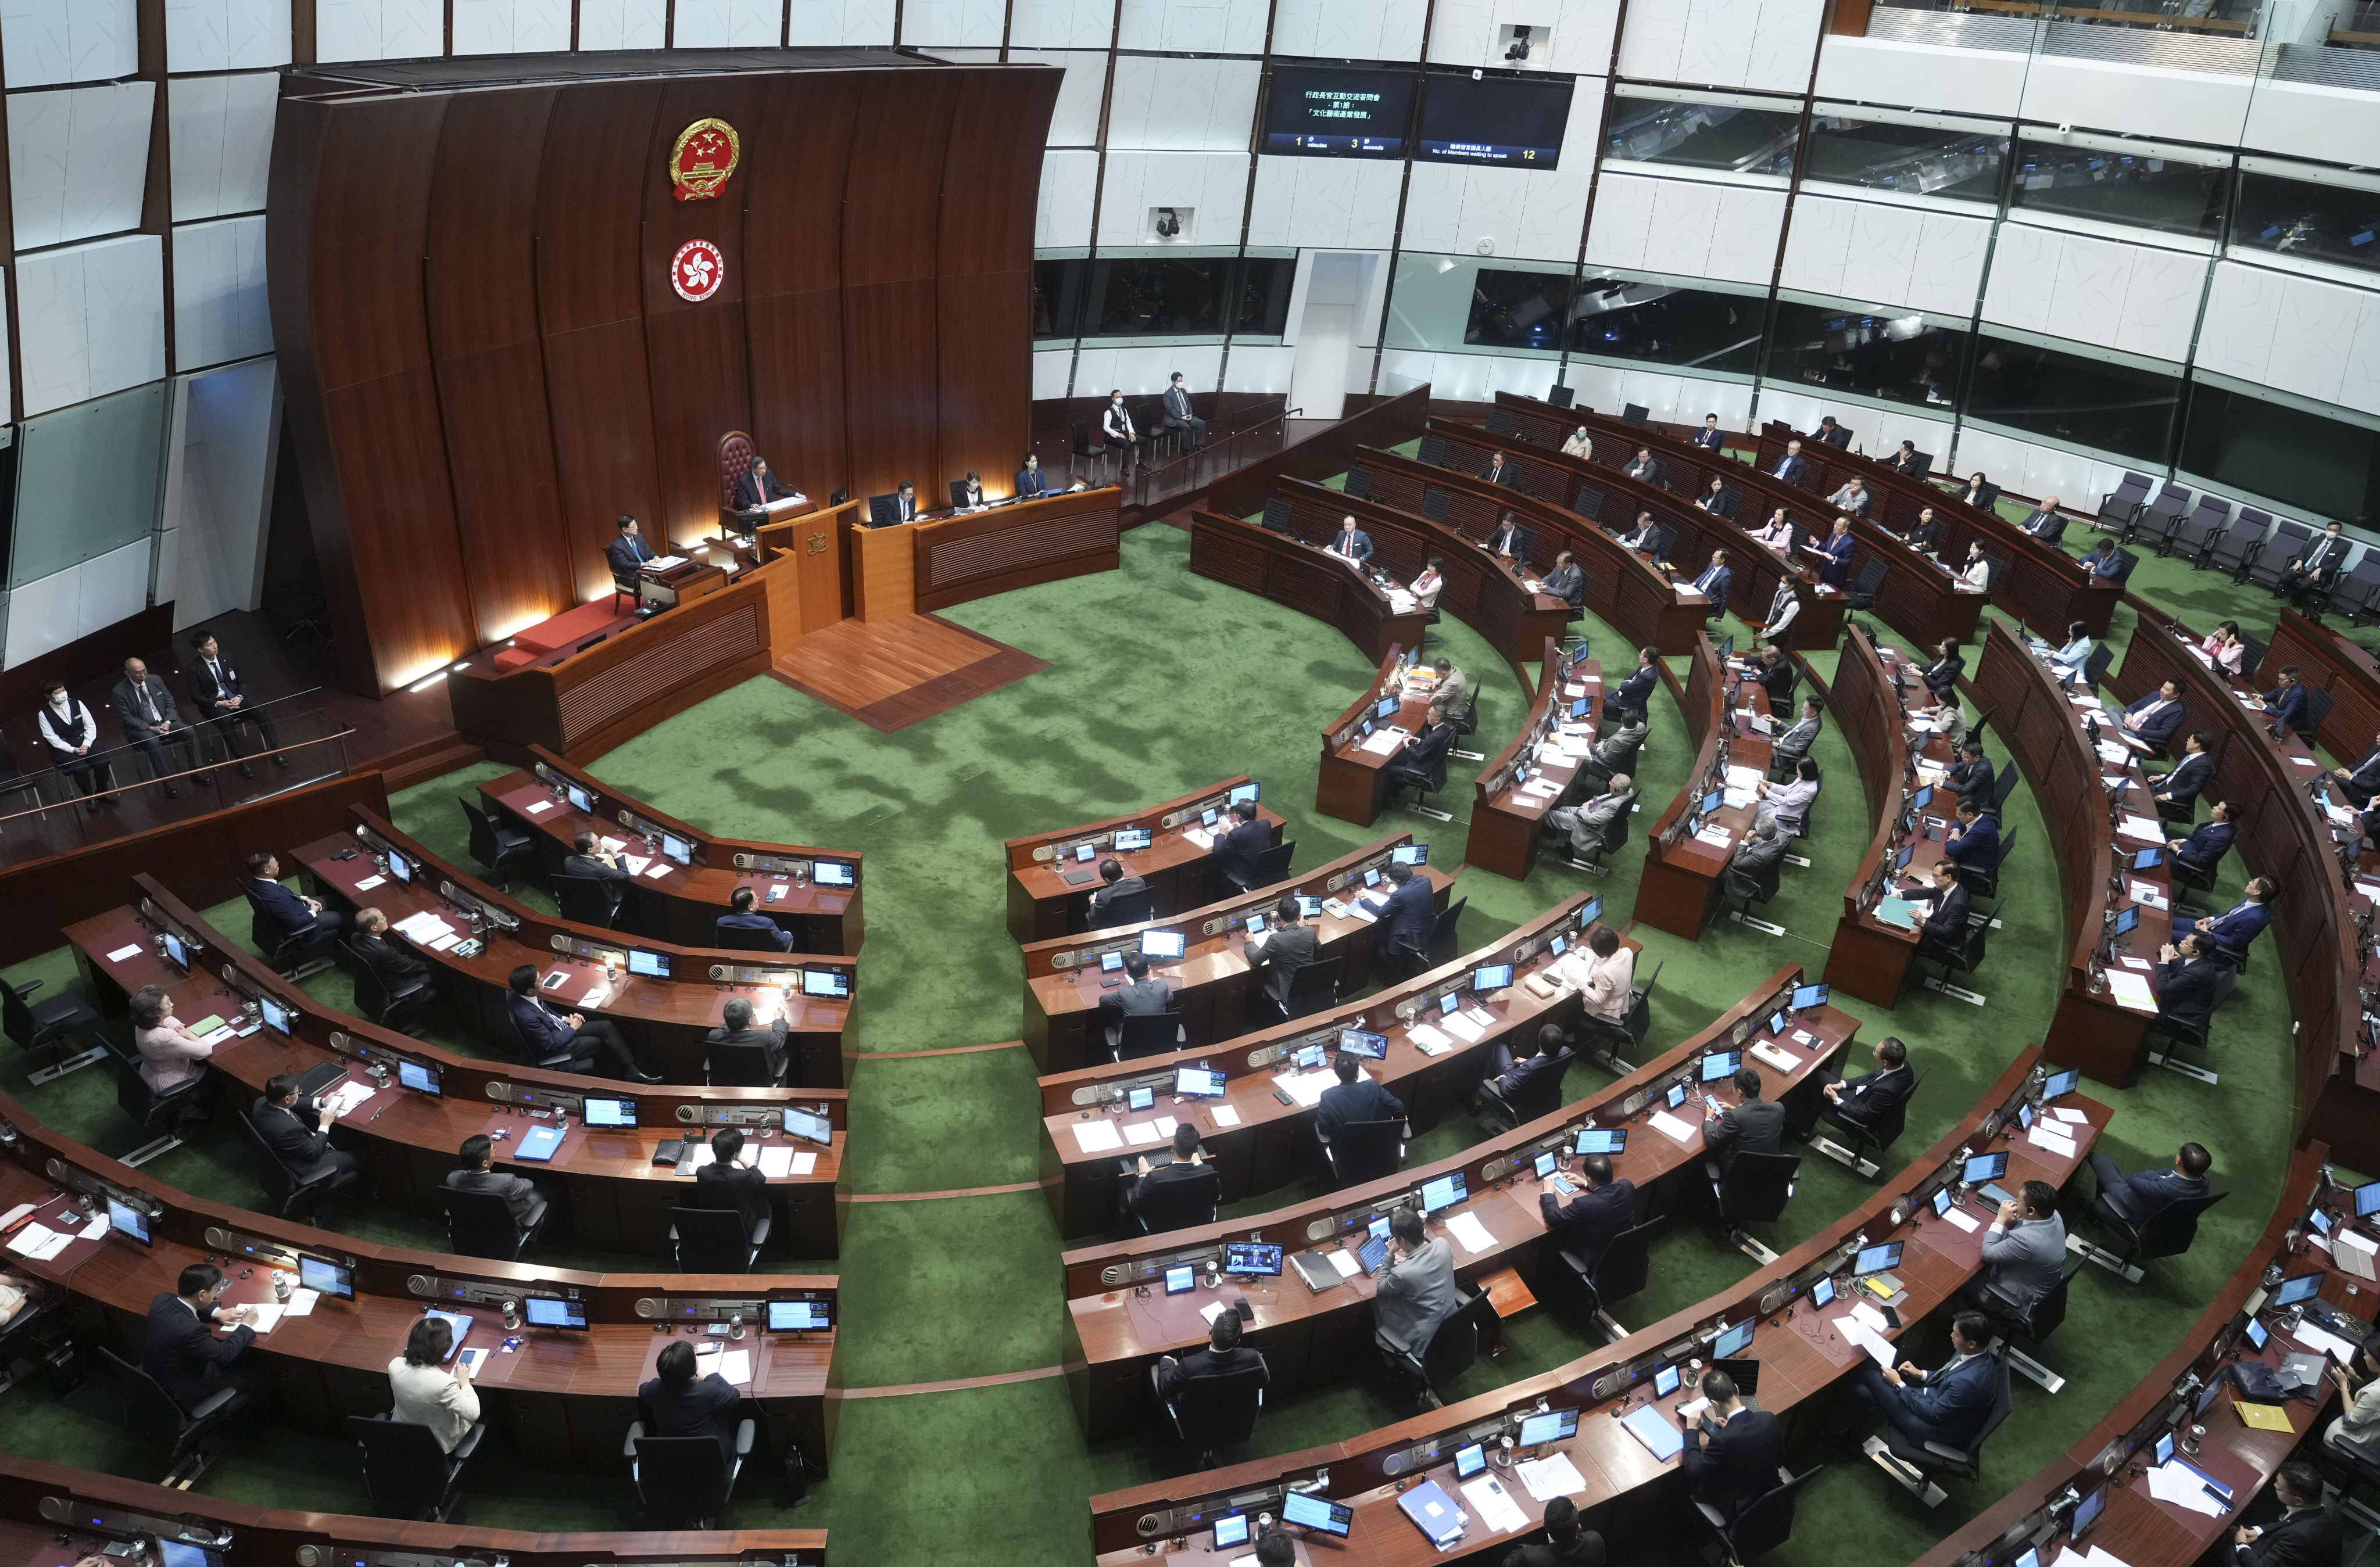 A question-and-answer session in the Legislation Council chamber on July 13. Officials must have diverse interactions to ensure their policies are fair, accountable and serve everyone. Photo: Sam Tsang